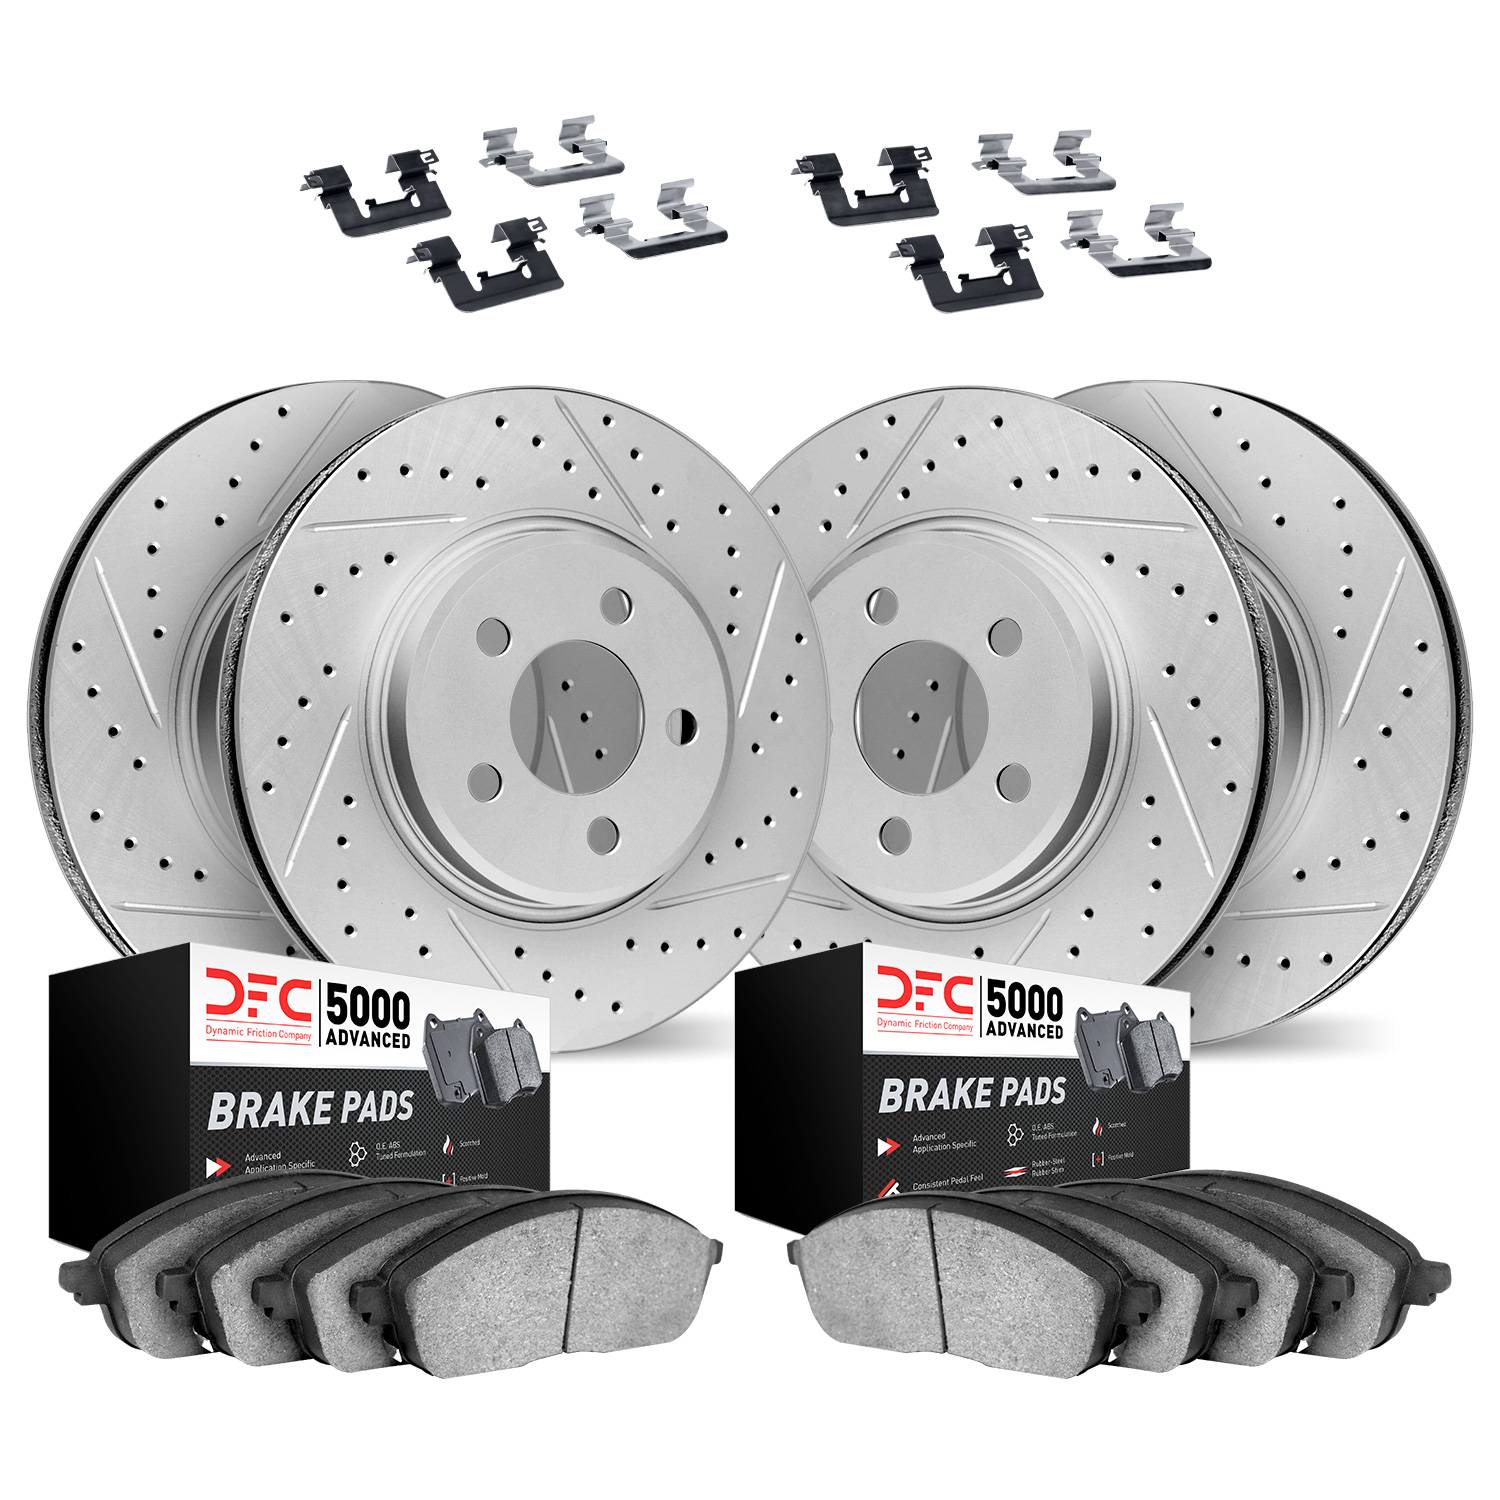 2514-31071 Geoperformance Drilled/Slotted Rotors w/5000 Advanced Brake Pads Kit & Hardware, 2016-2018 BMW, Position: Front and R